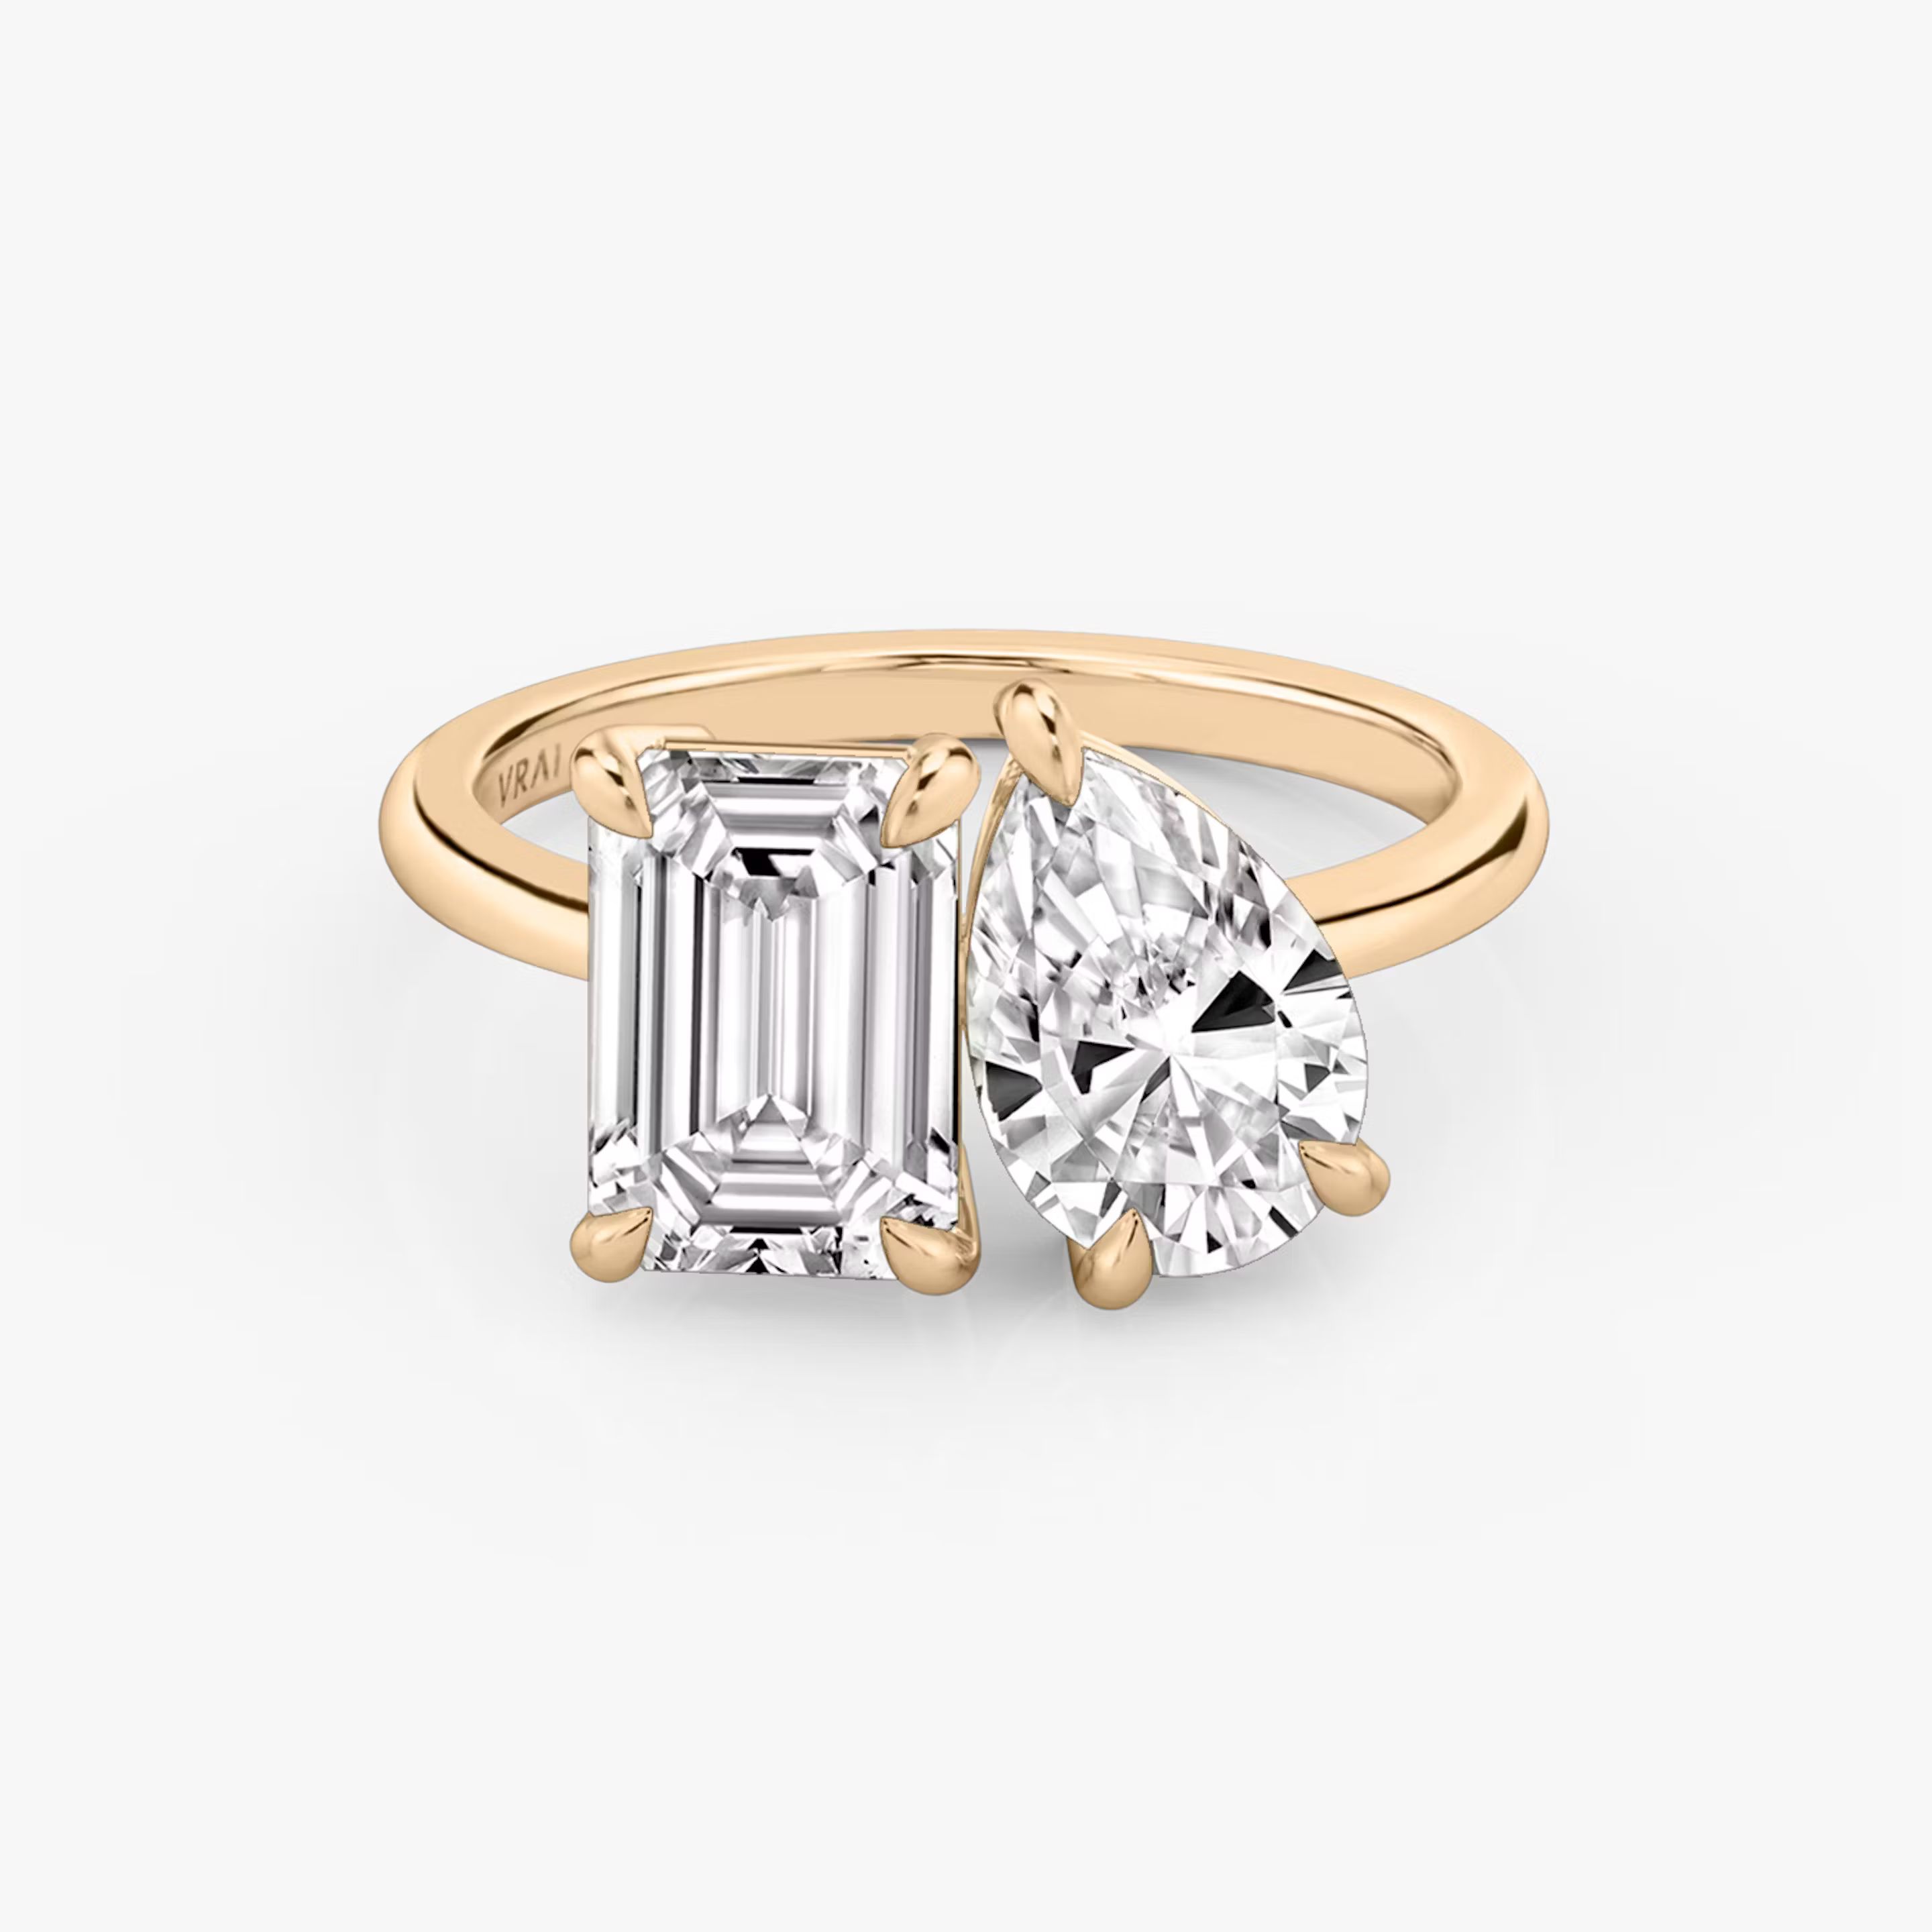 The Toi et Moi Emerald and Pear Engagement Ring | Vrai and Oro